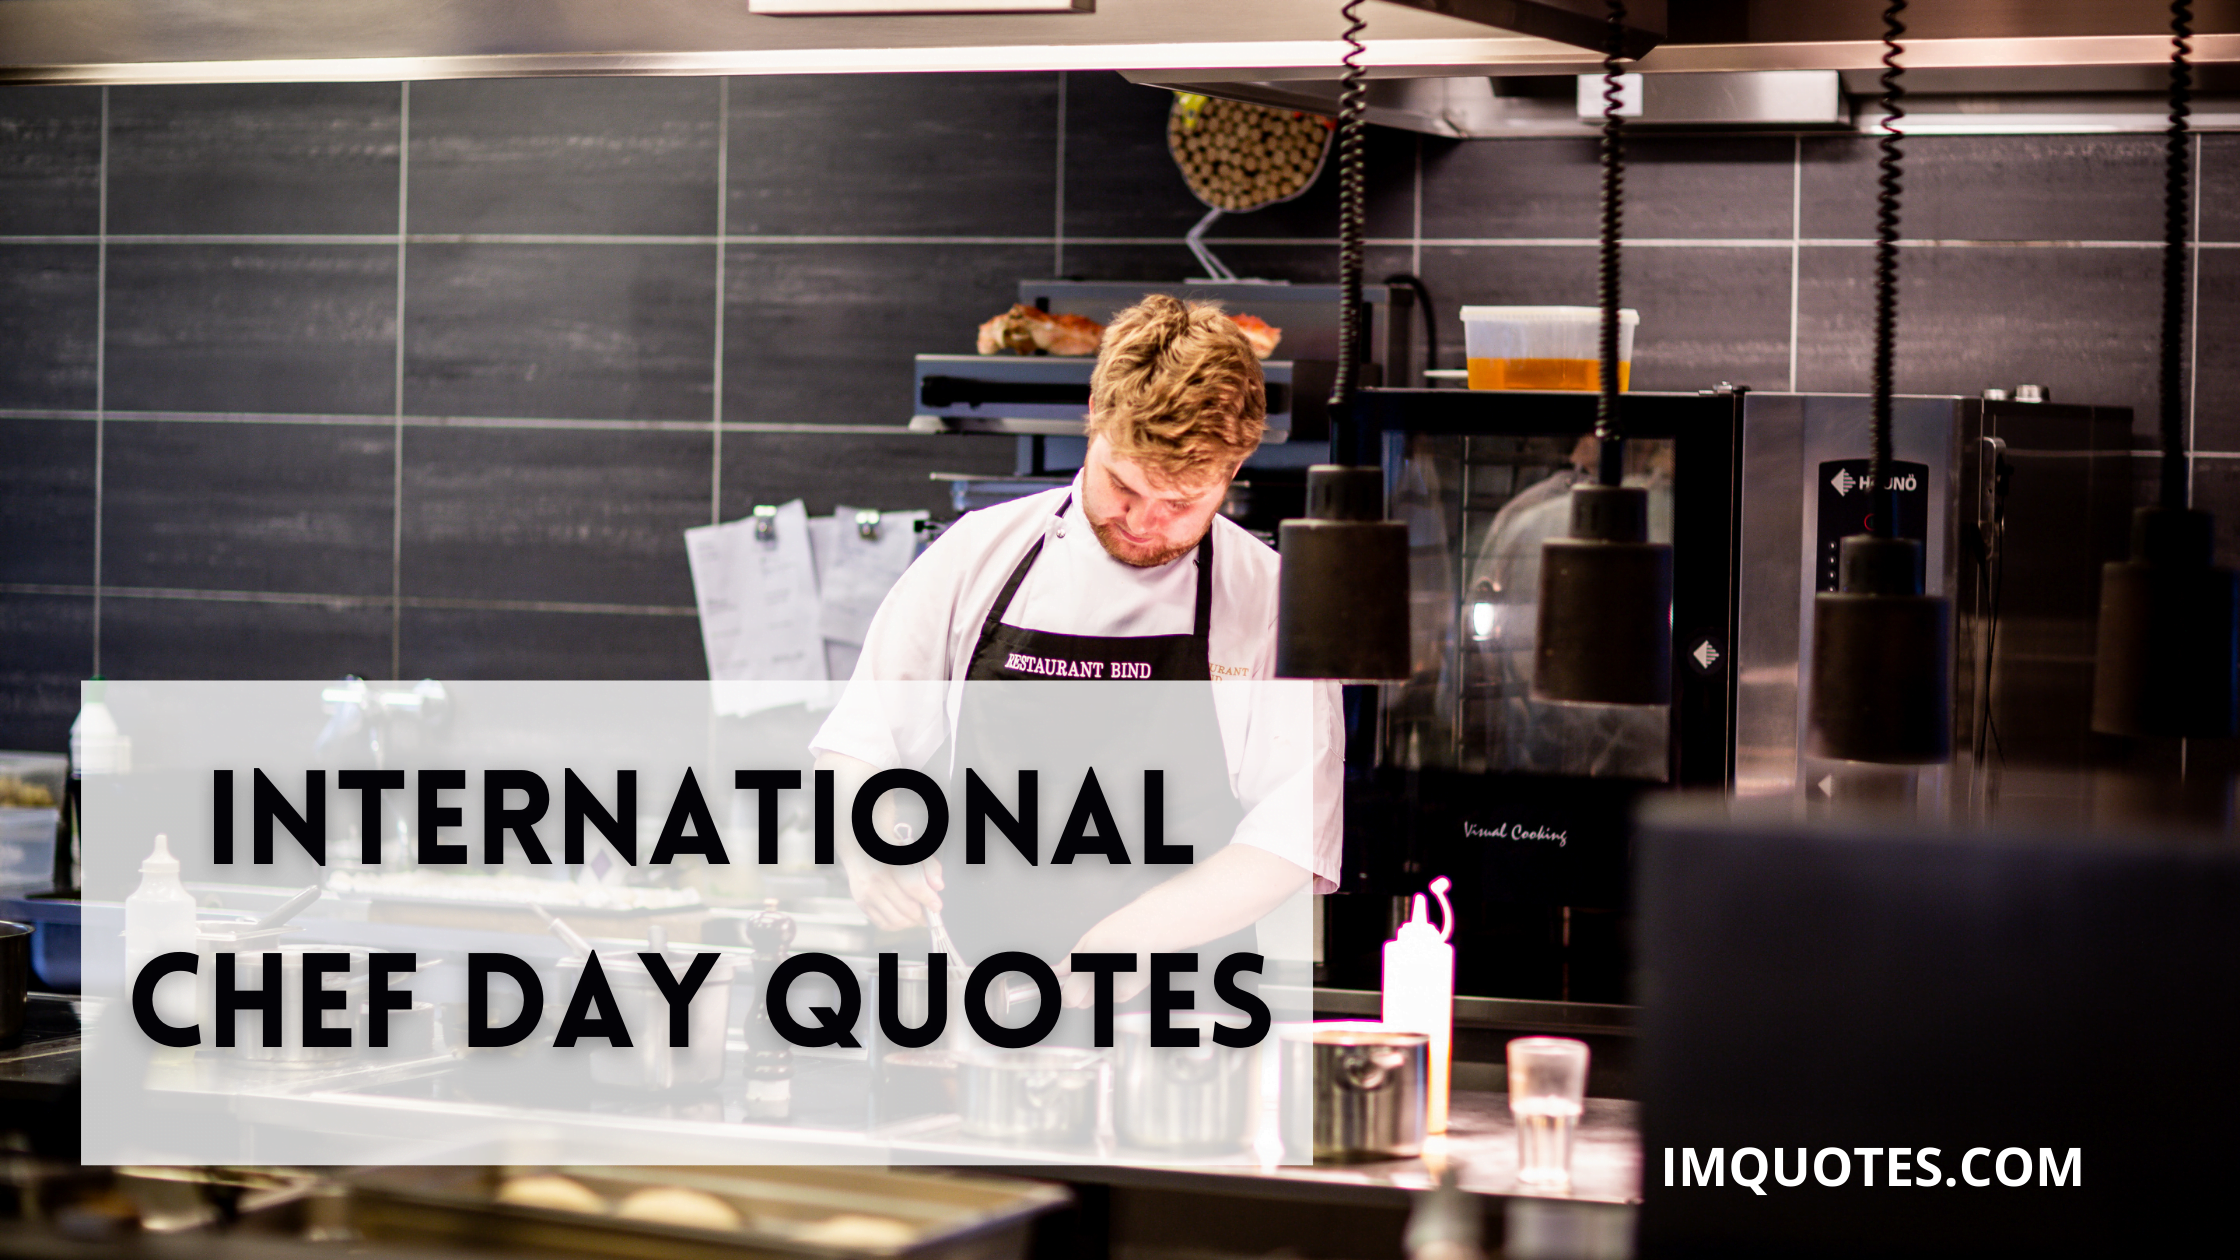 International Chef Day Quotes1